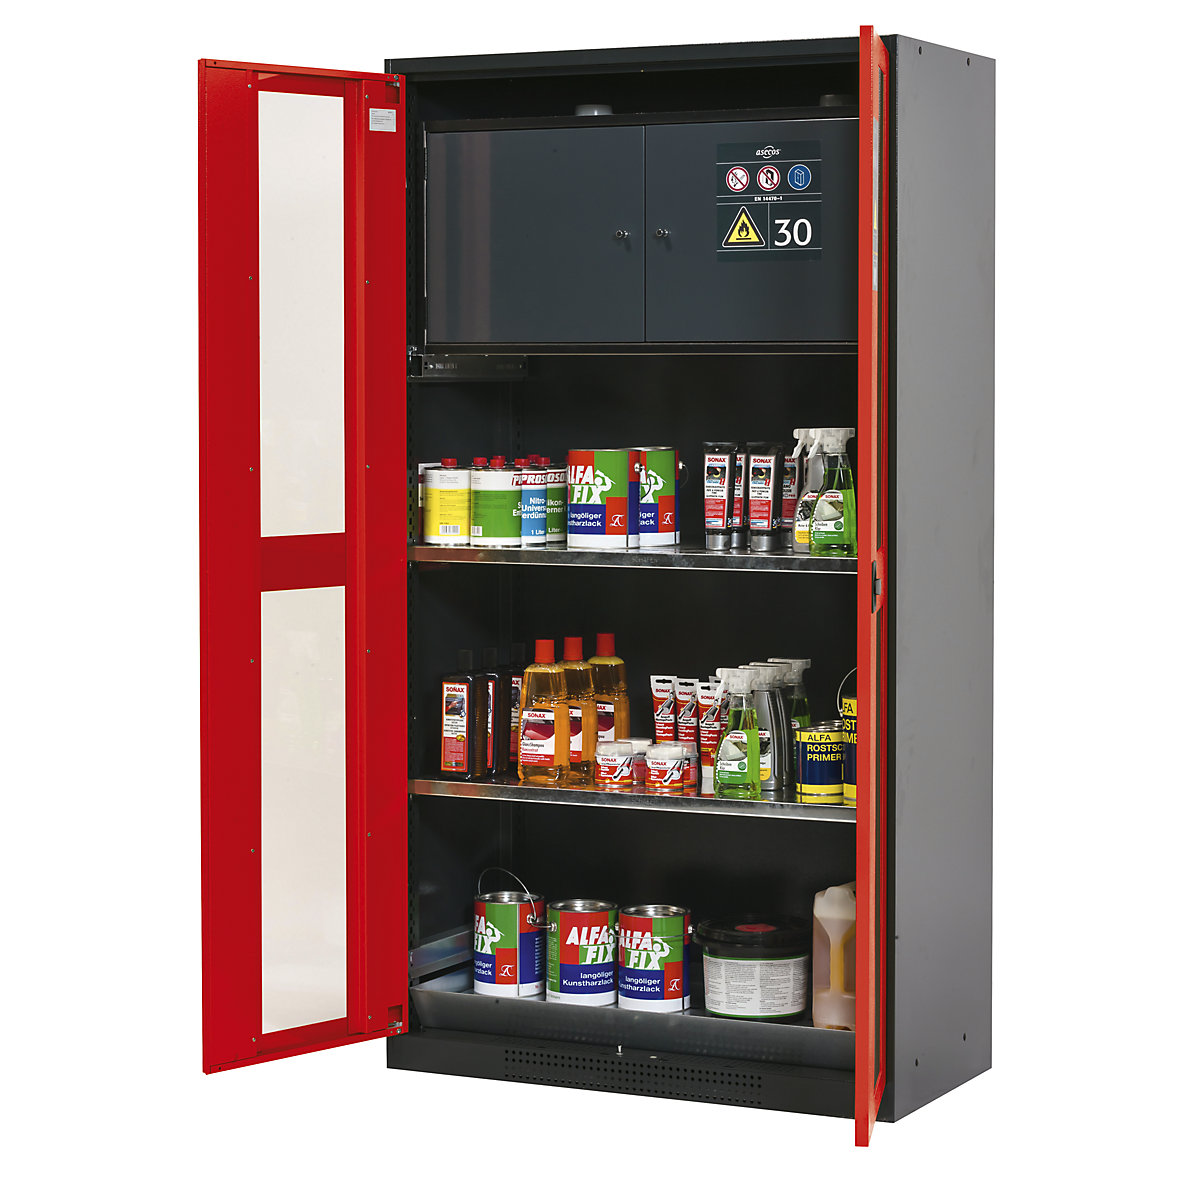 Chemical storage cupboard – asecos, door with vision panels, with type 30 hazardous goods storage box, traffic red-3